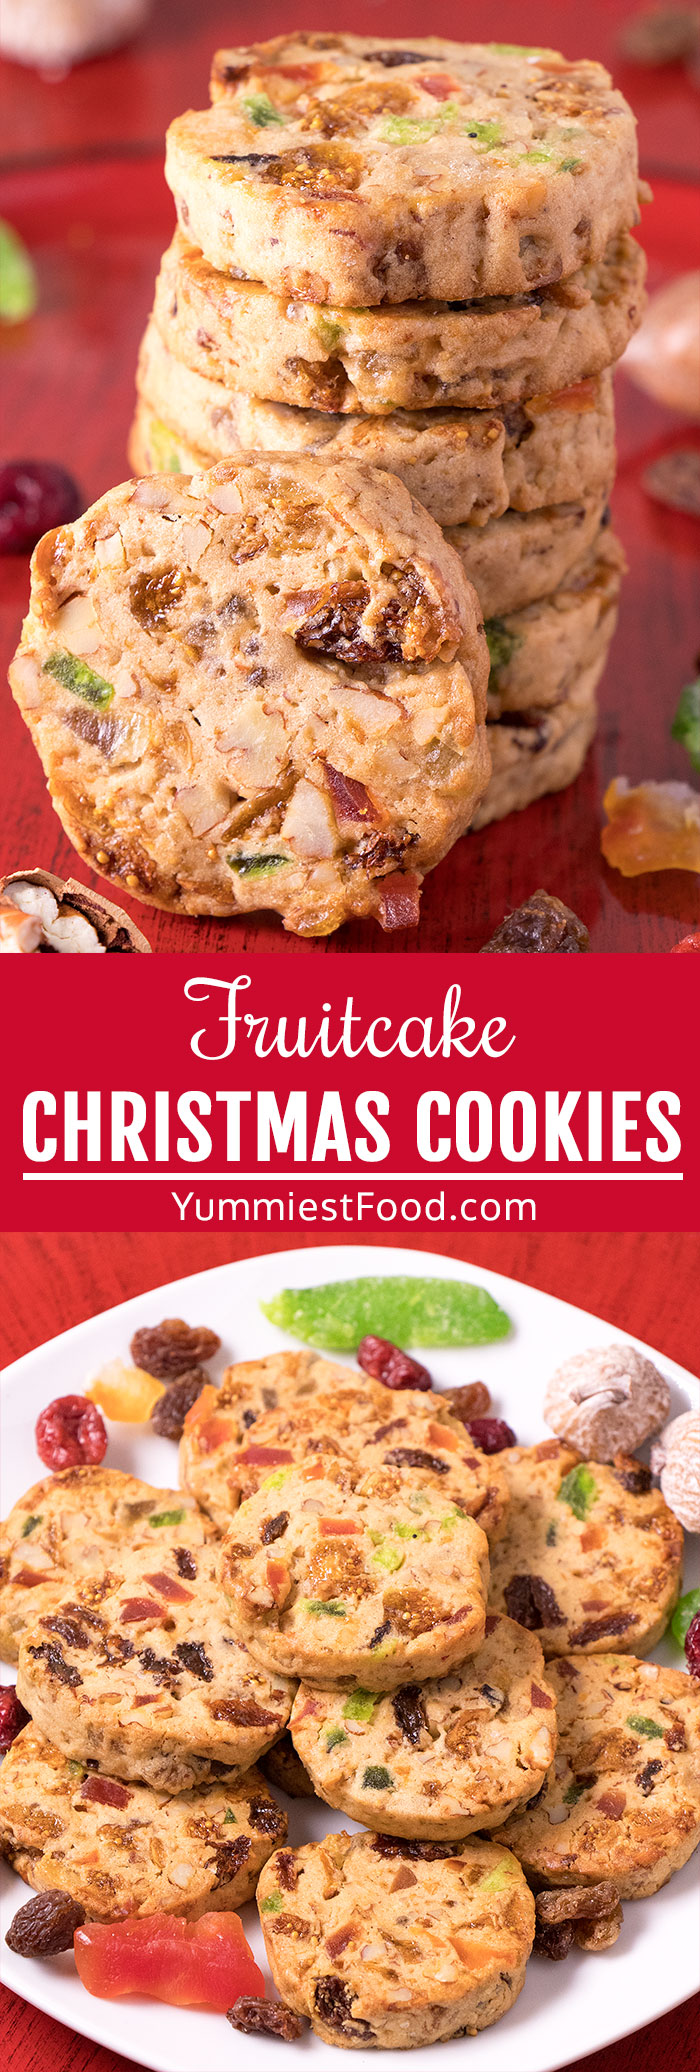 Fruitcake Christmas Cookies - These pretty, chewy and delicious Fruitcake Christmas Cookies, fruit rich and nut filled, with a hint of cinnamon and cloves, will surely be one of your favorite Fruitcake Cookies. #christmas #xmas #christmasrecipes #christmasdesserts #desserts #dessert #dessertrecipes #dessertfoodrecipes #cookies #easycookies #cookierecipe #christmascookies #fruitcakecookies